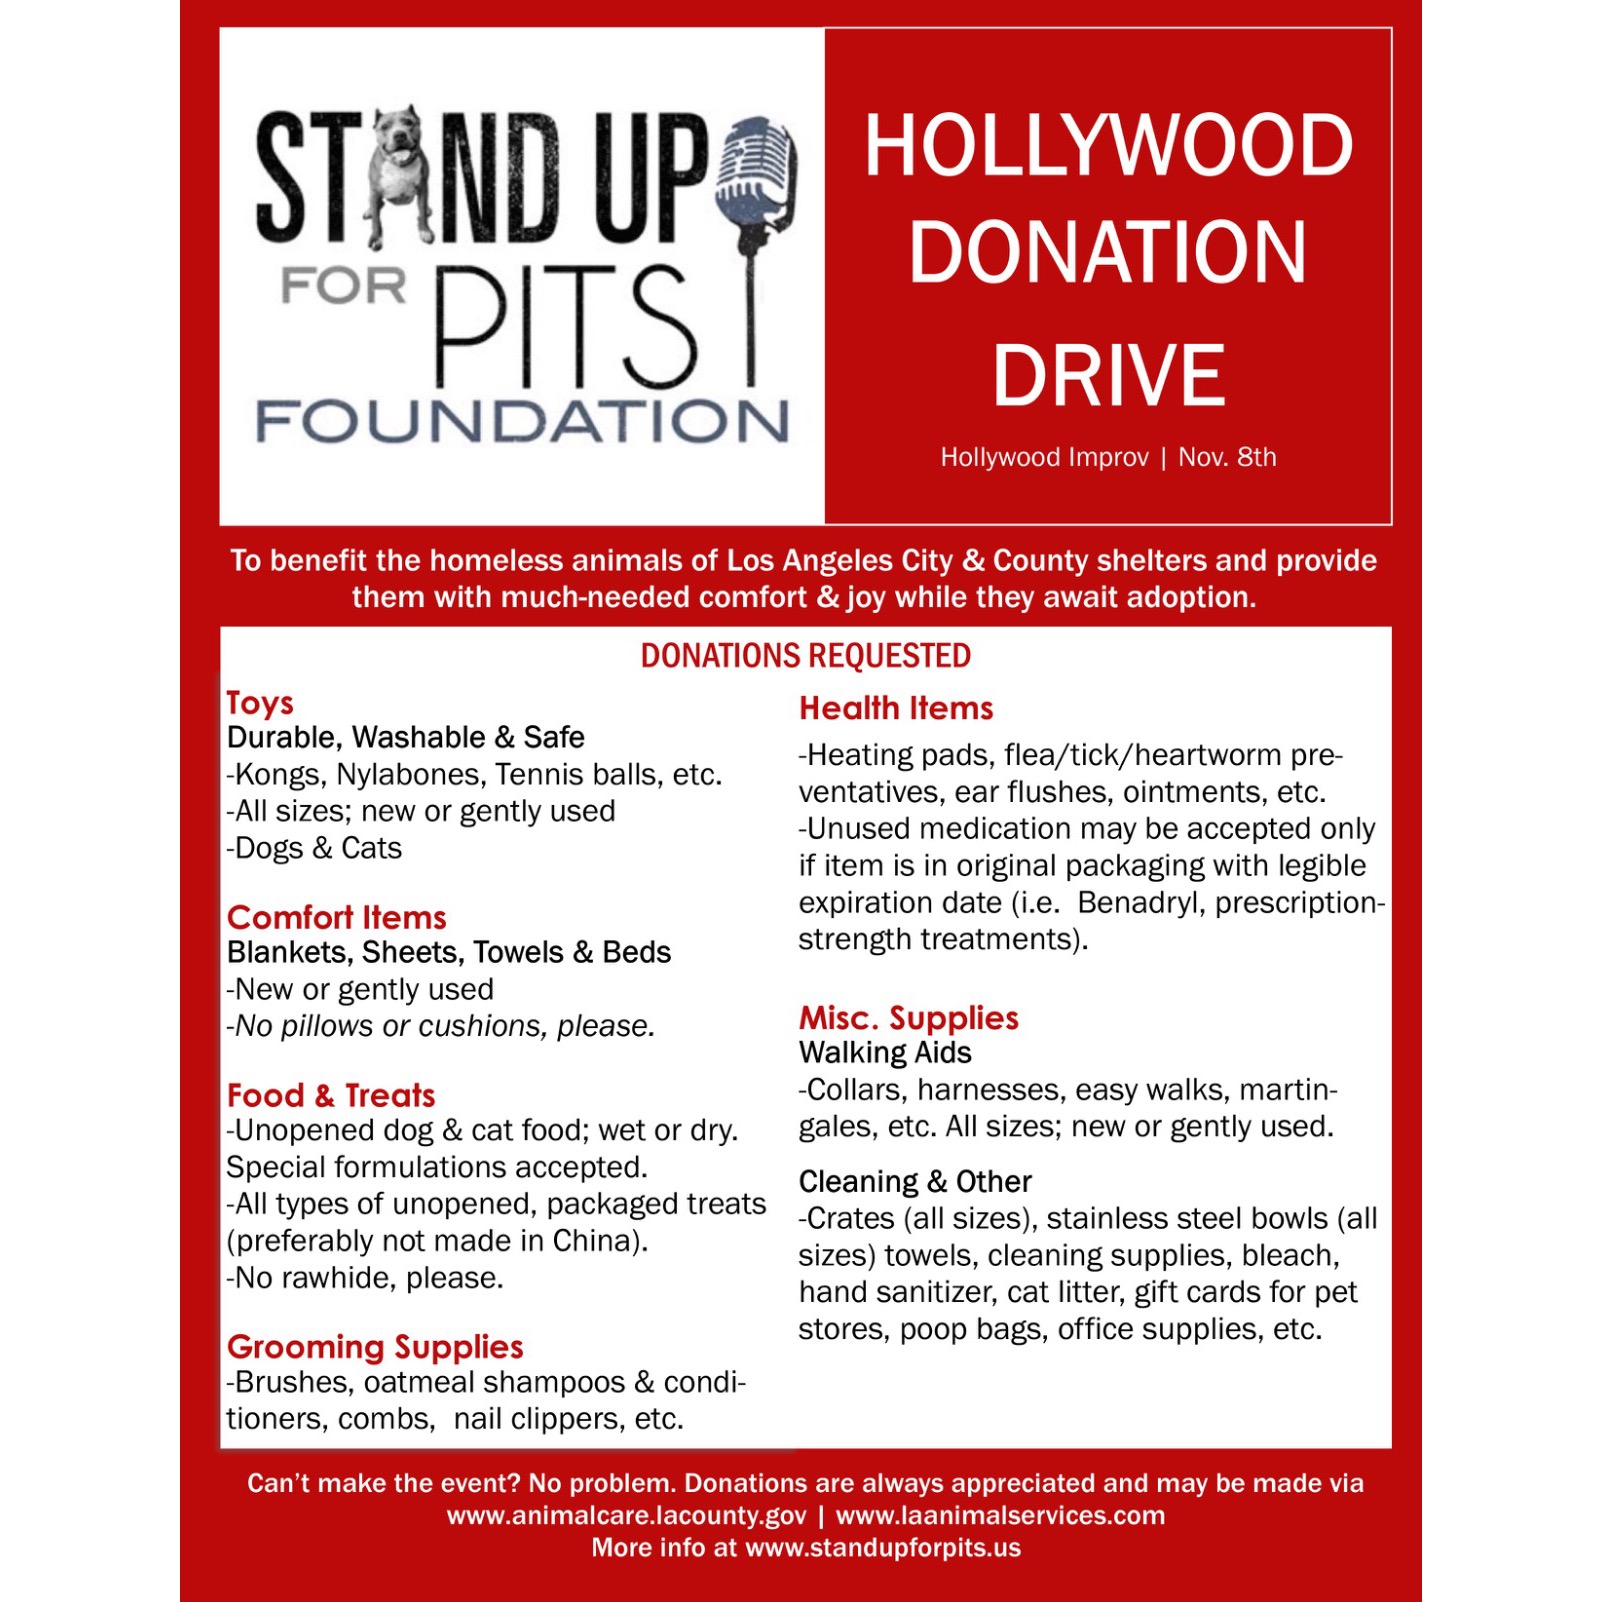 SUFP Donation Drive HOLLYWOOD is back!!